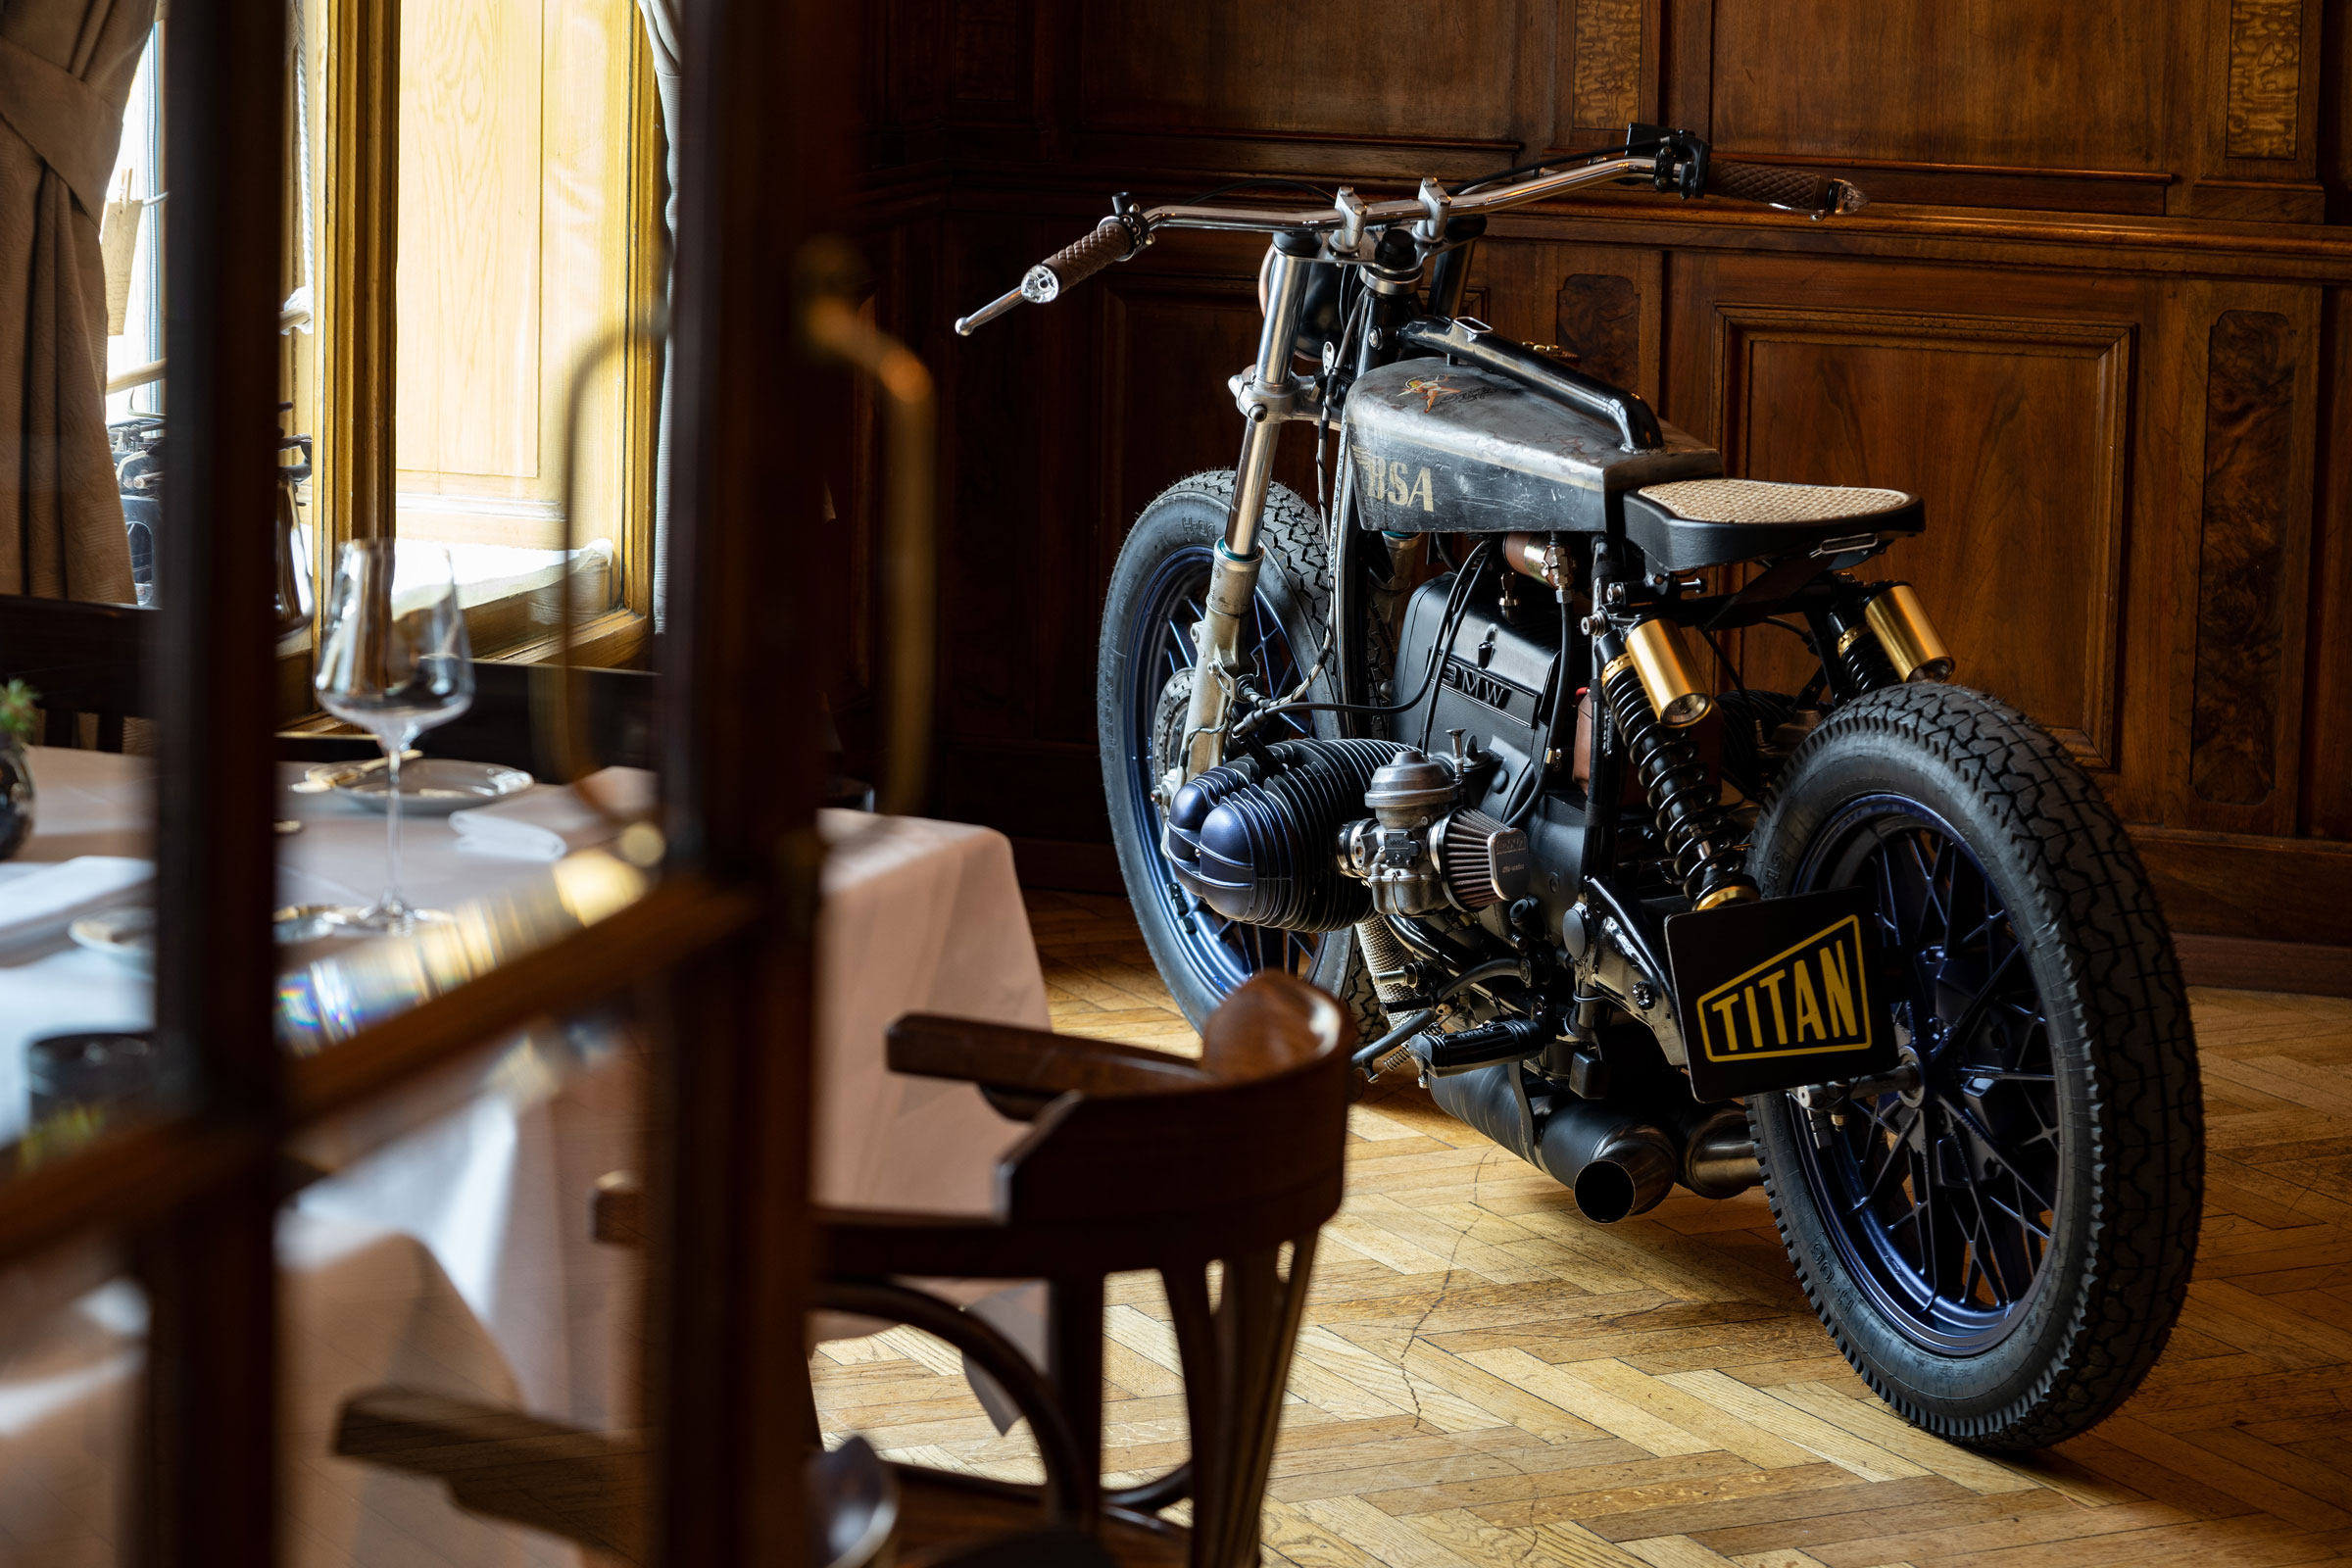 Titan-Motorcycles-Cafe-Racer-Lifestyle-meets-Club-of-Newchurch_06